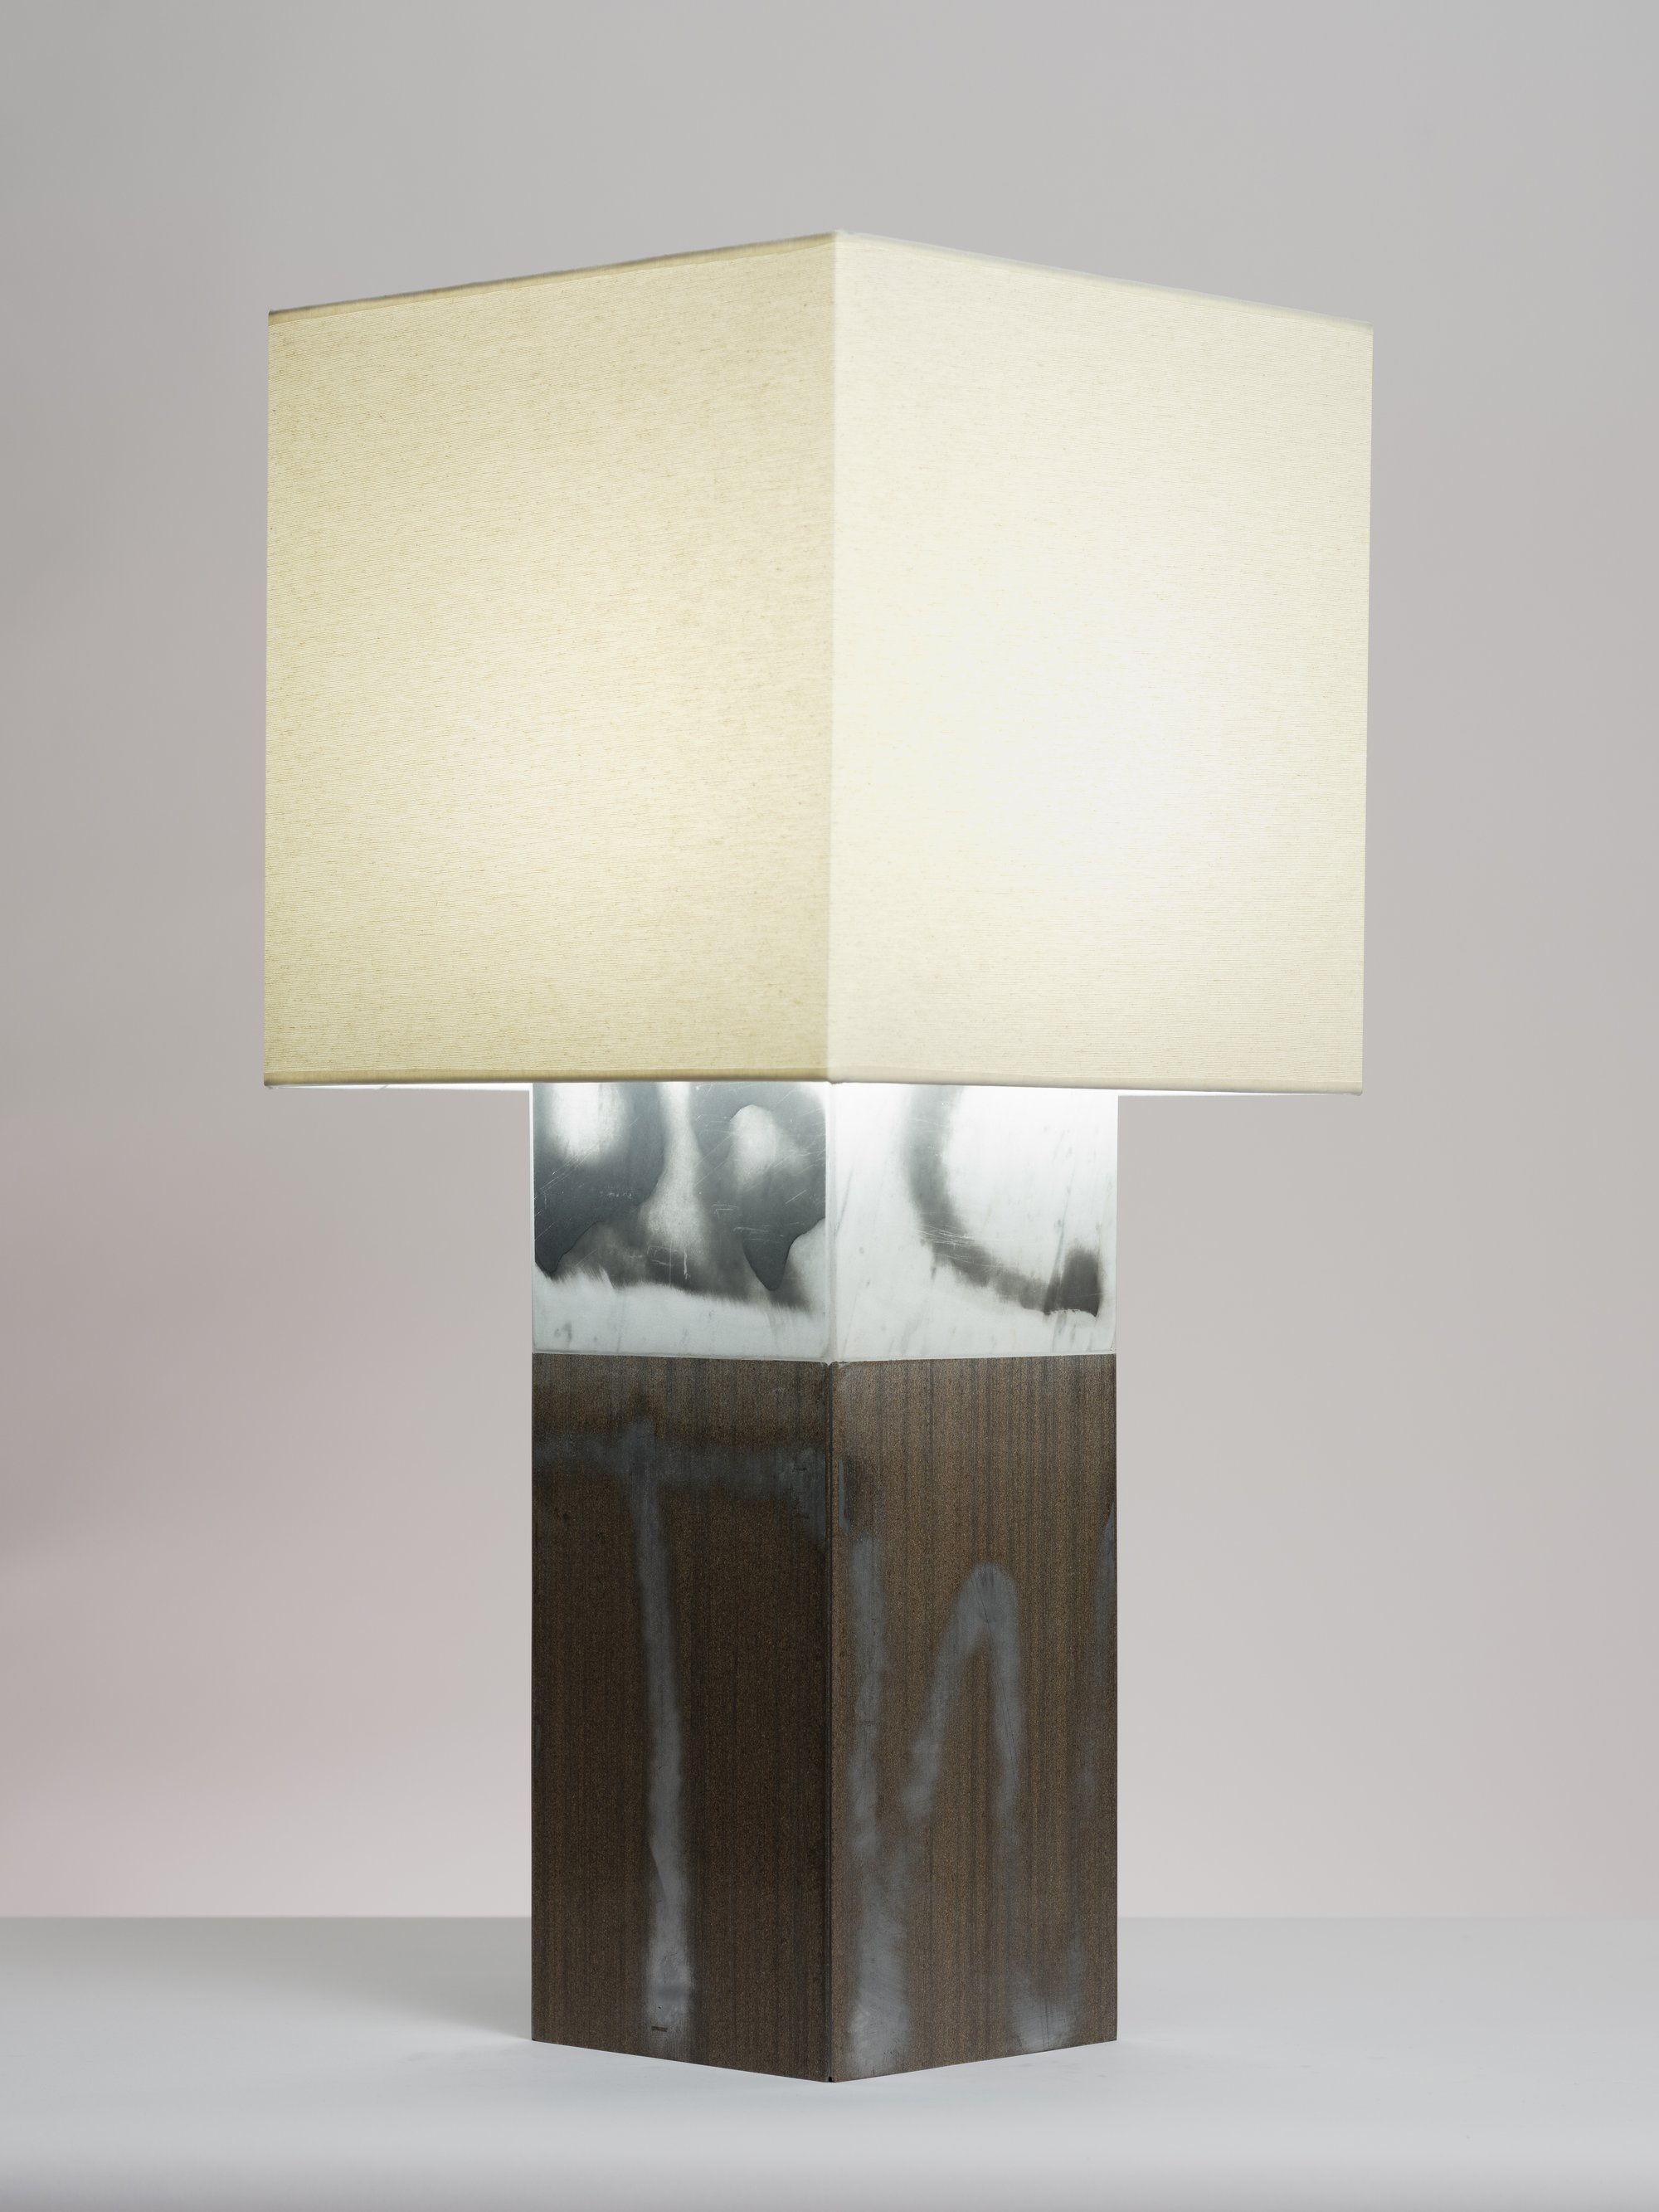 Christodoulos Panayiotou, Untitled, lamp, Carrara and Wenge marble base: 45 x 18 x 18 cm (17 3/4 x 7 1/8 x 7 1/8 in), Linetta fabric shade: 34 x 34.4 x 34.4 cm (13 3/8 x 13 1/2 x 13 1/2 in), light fitting, 2021